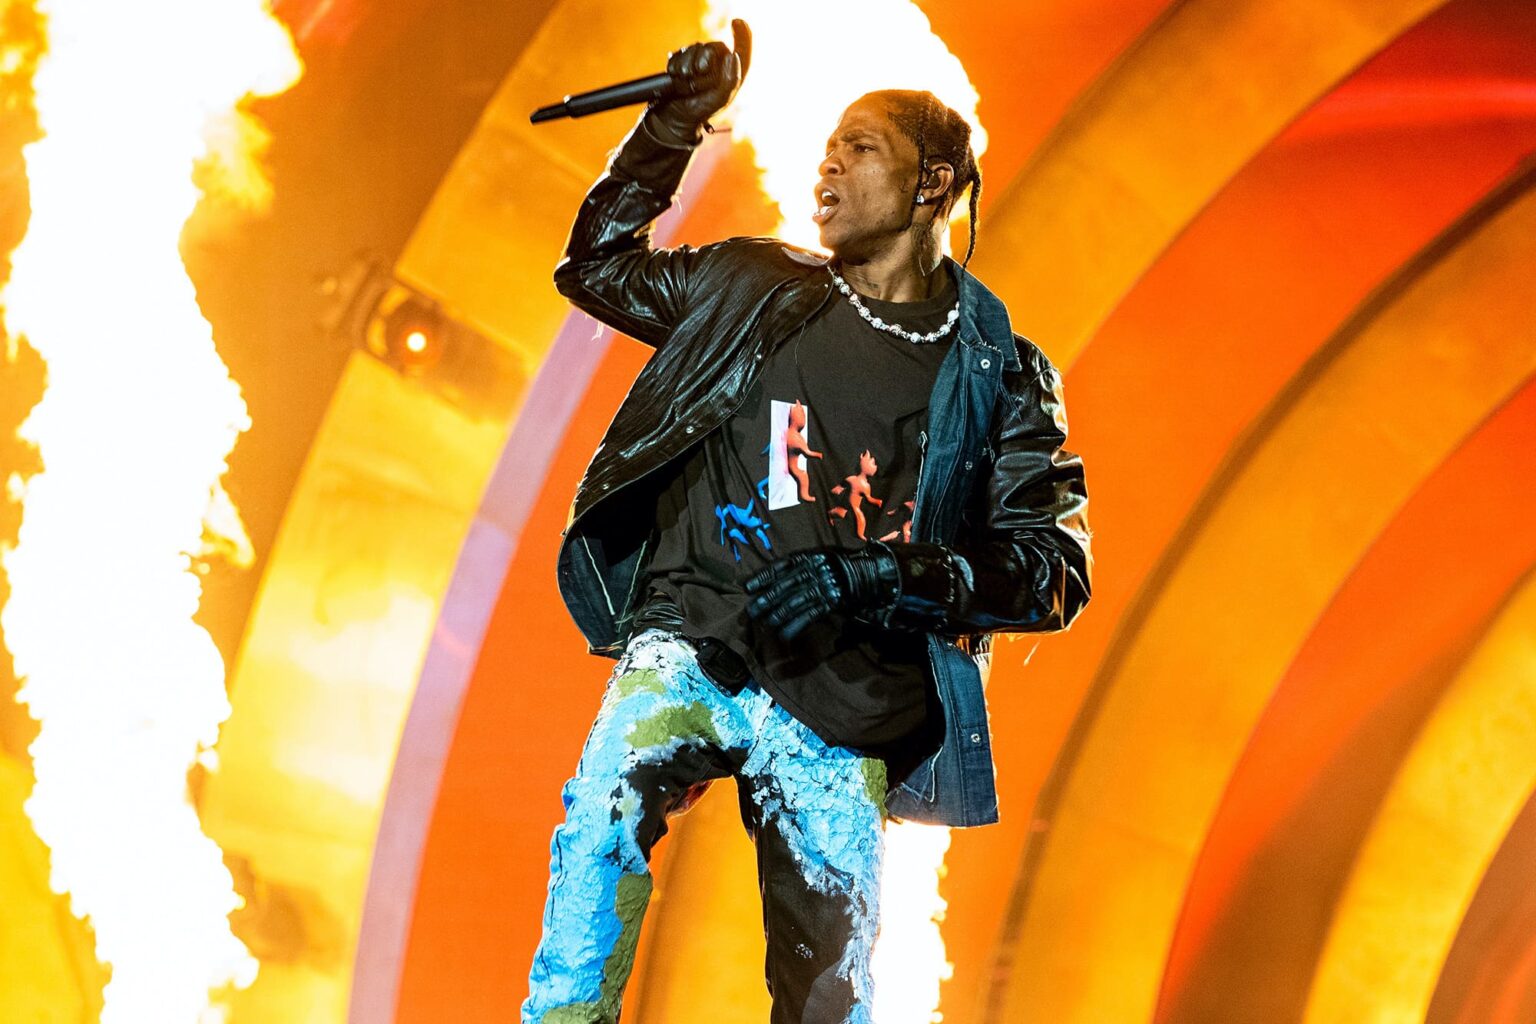 Eight people were killed and many more injured at Travis Scott's Astroworld Festival. Read how these young victims were killed during a crowd surge.